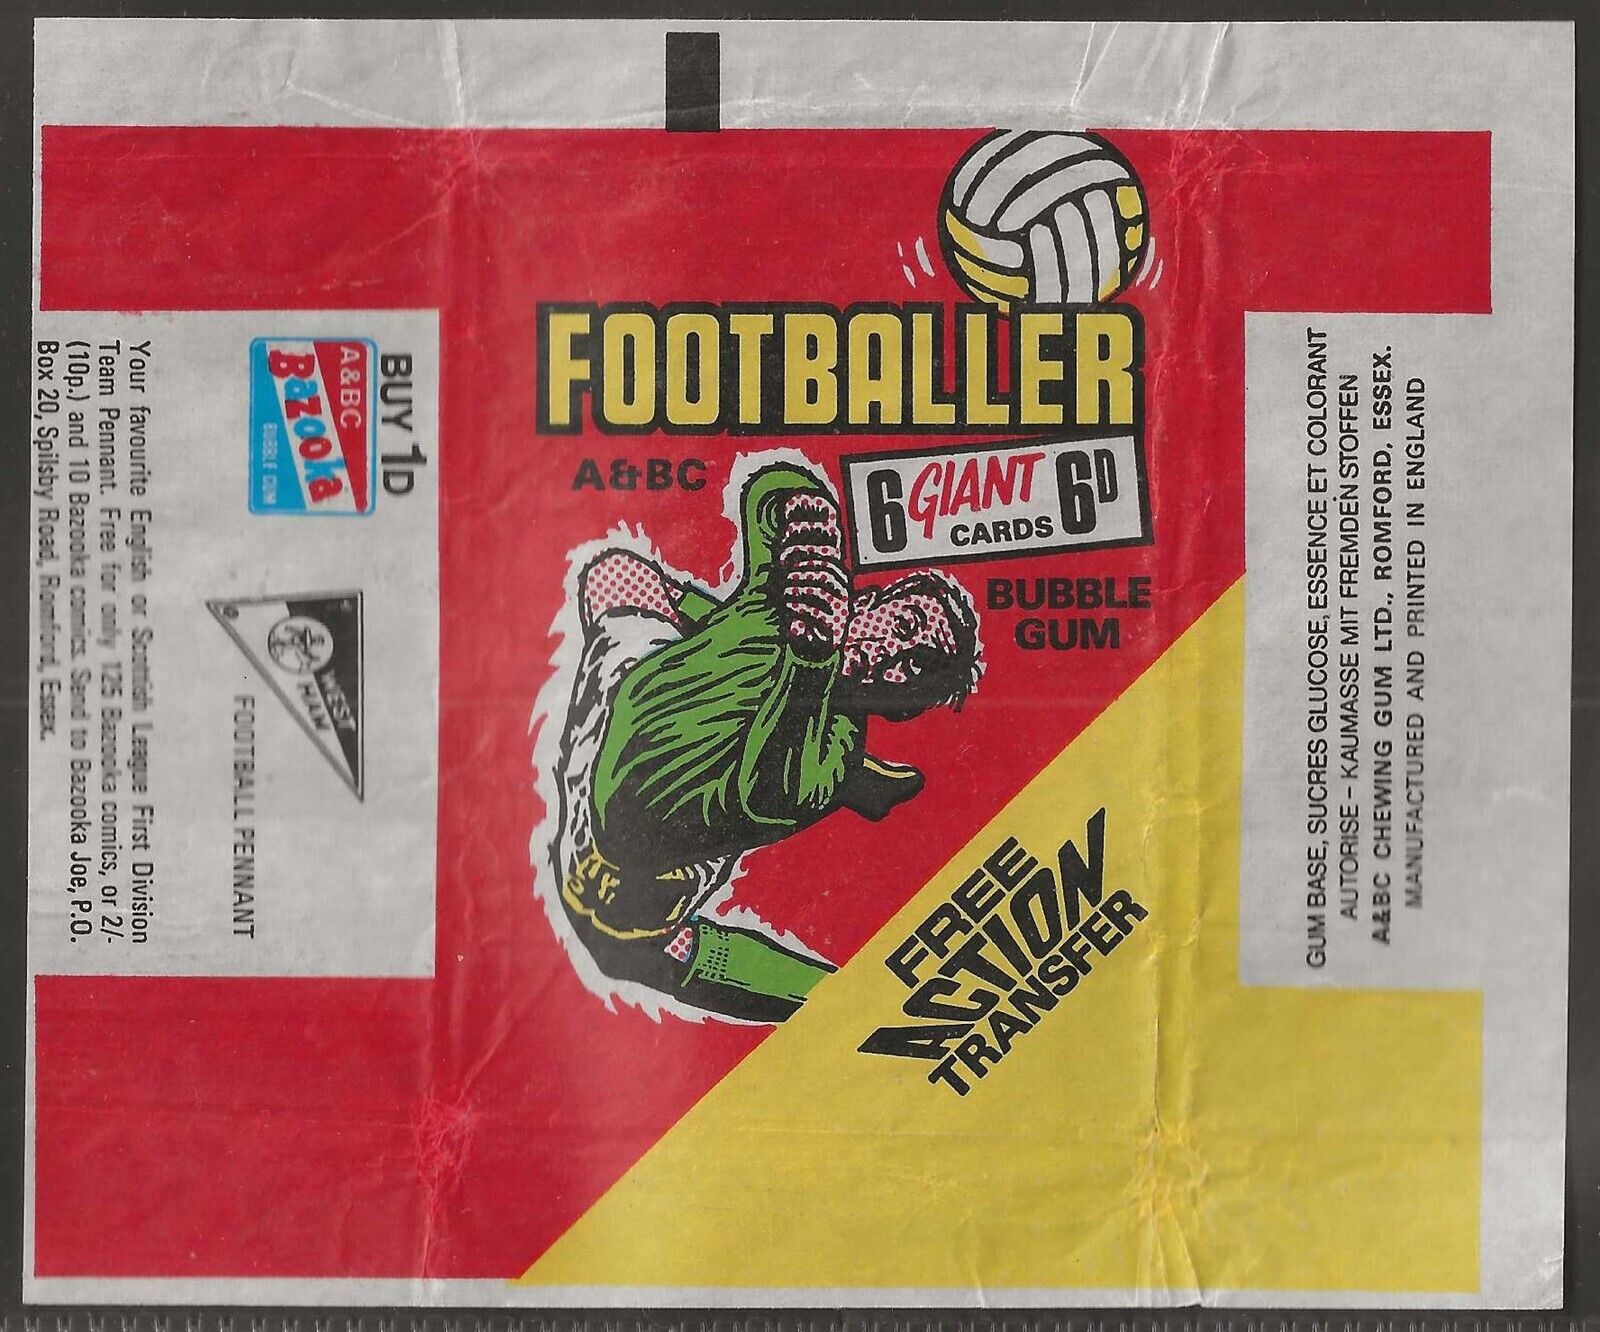 A&BC WRAPPER FOOTBALL 1970 ORANGE BACK (VARIANT FREE ACTION OFFER PENNANT)